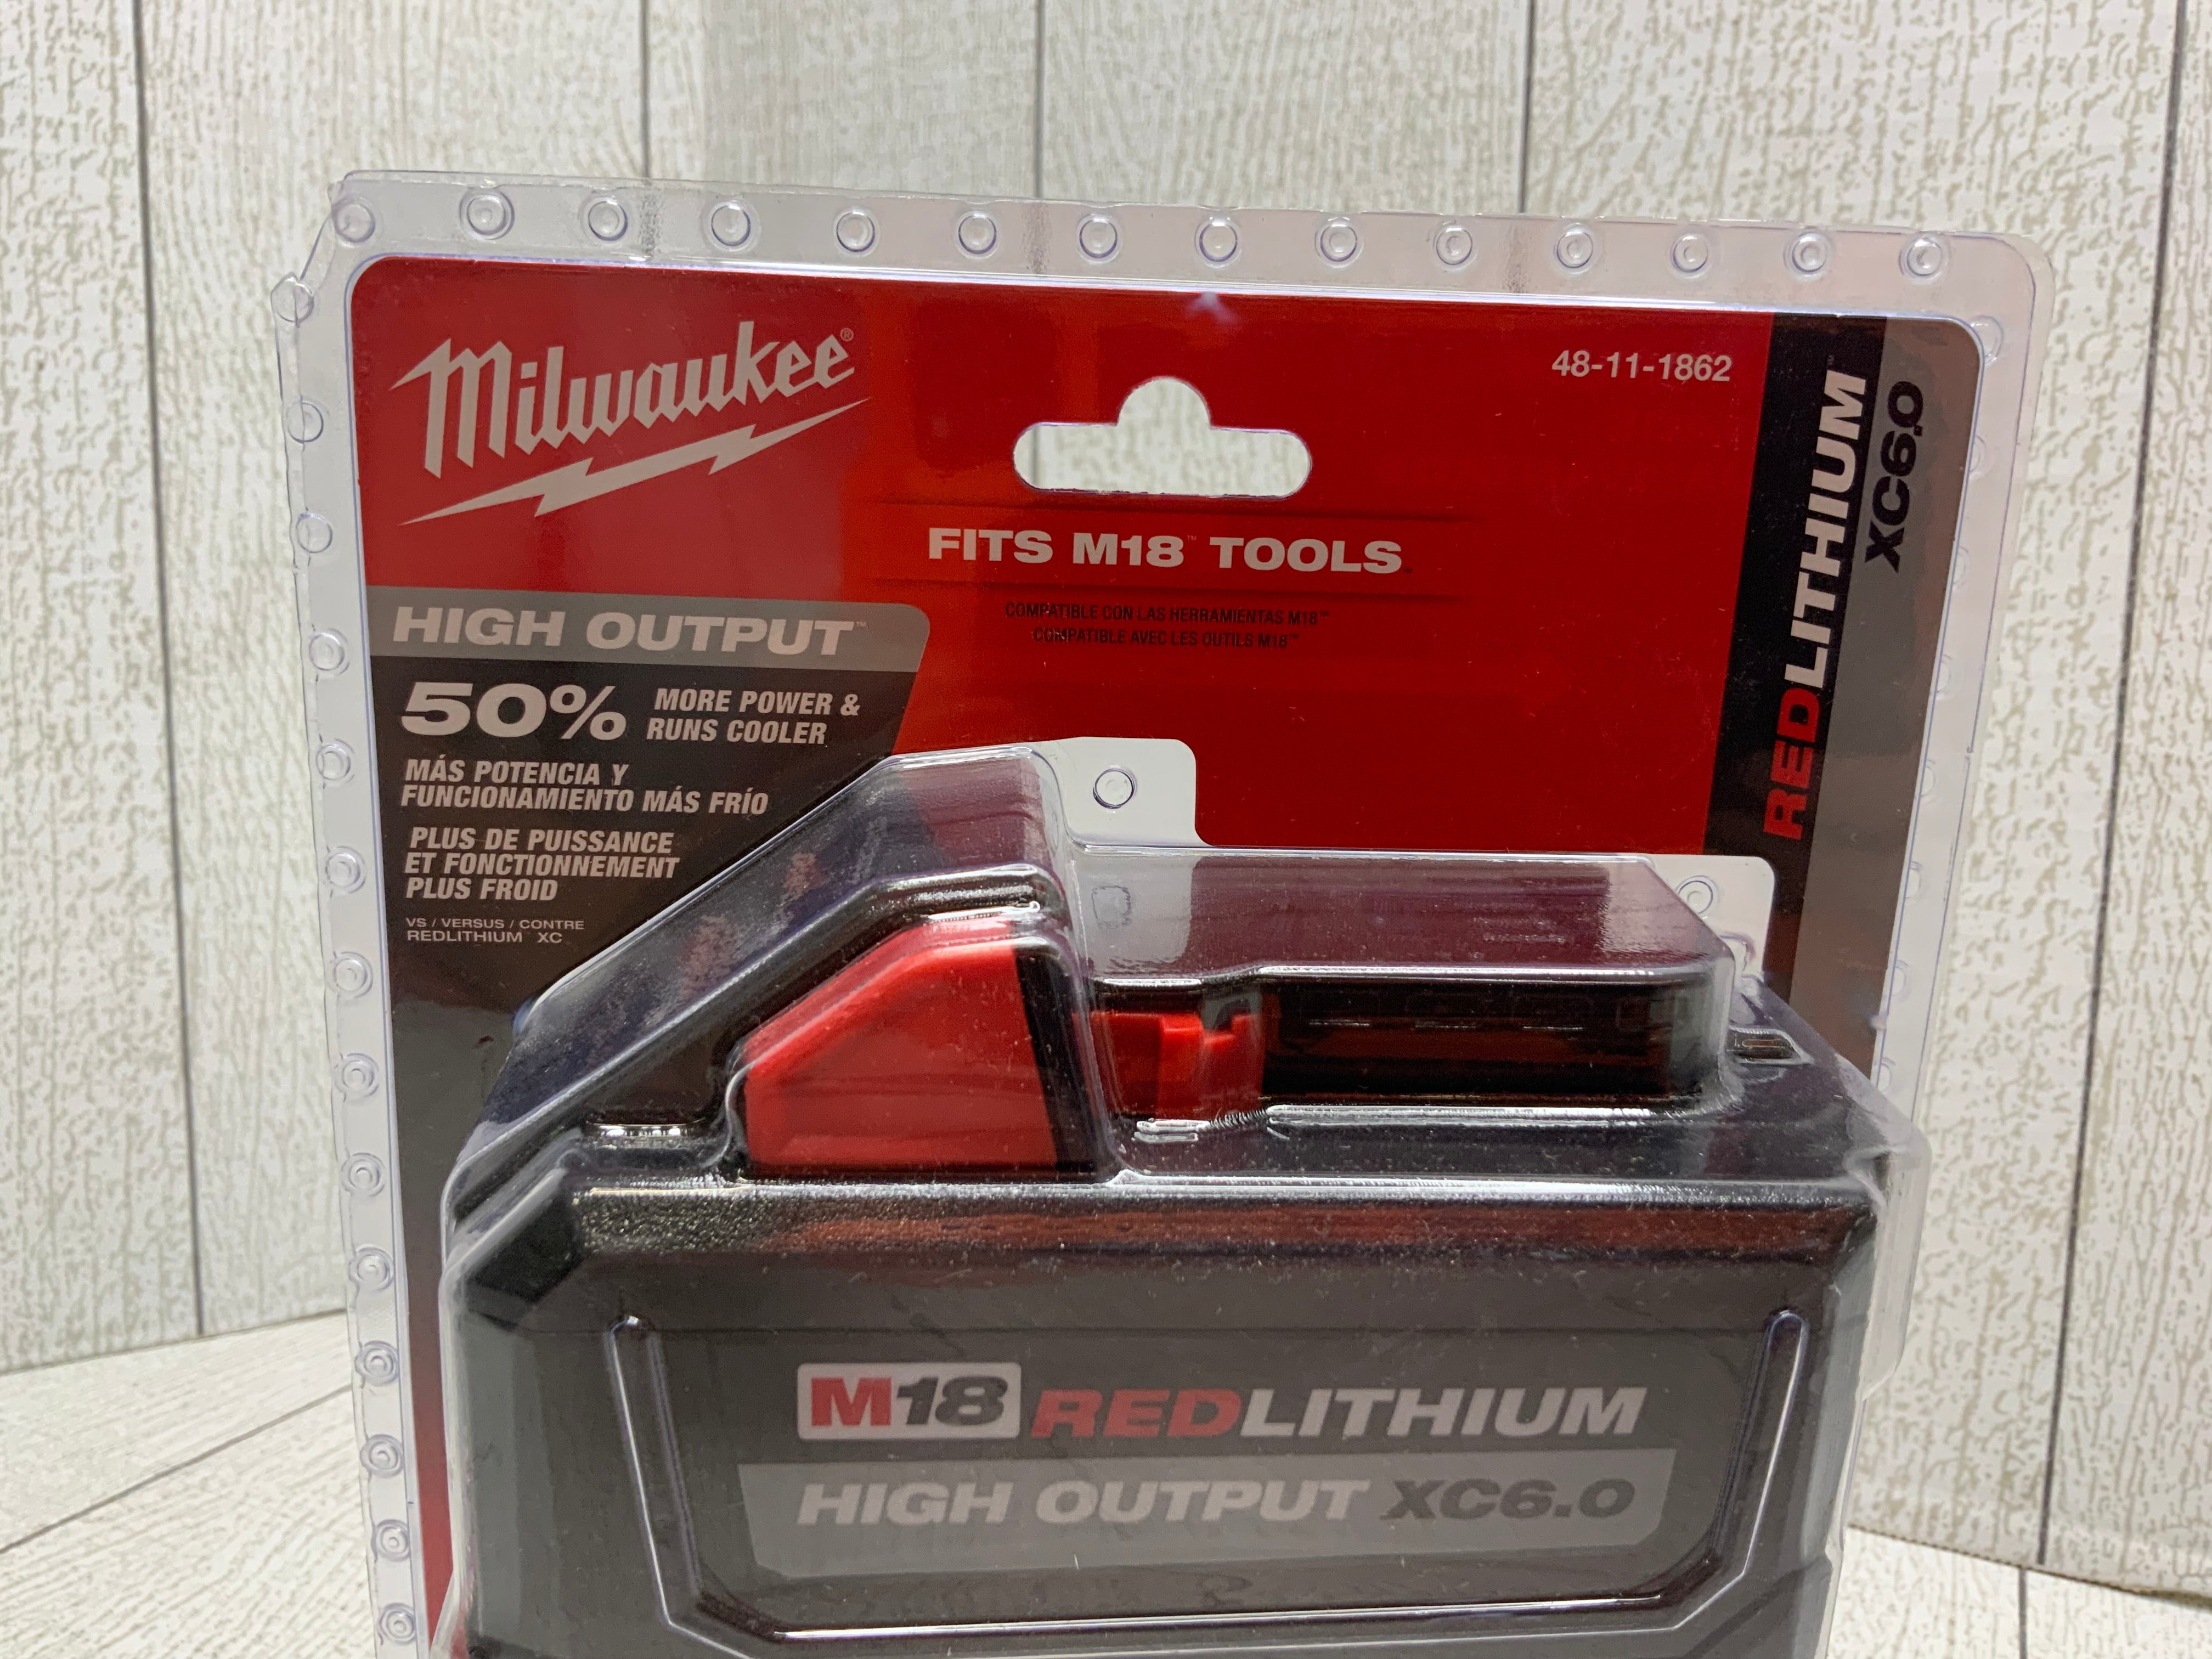 Milwaukee M18 Red Lithium High Output XC6.0 Li-Ion Battery 2 Pack (8052300021998)